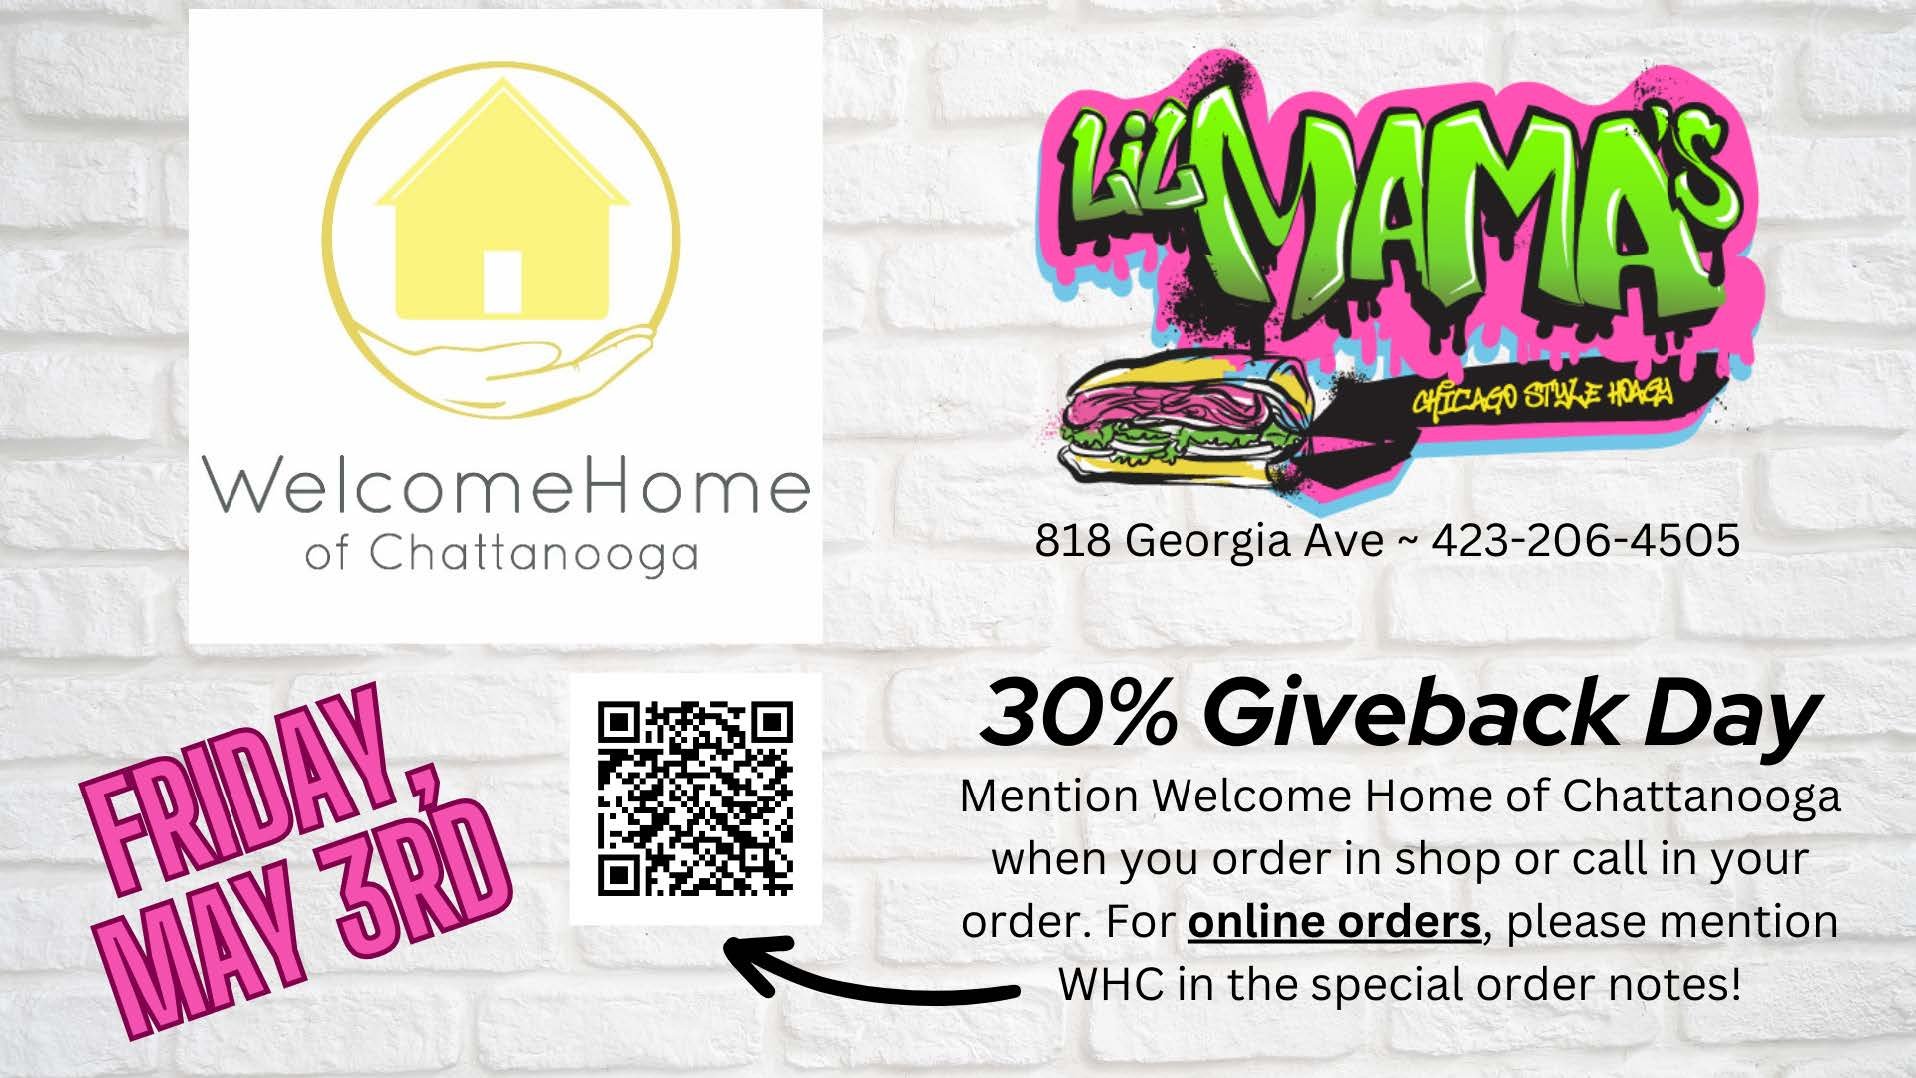 This is your reminder to eat lunch @lilmamaschicagostylehoagy. Don't have time to stay and eat there? No worries, place your order online - mentioning Welcome Home, of course- grab and go! 

 #giveback